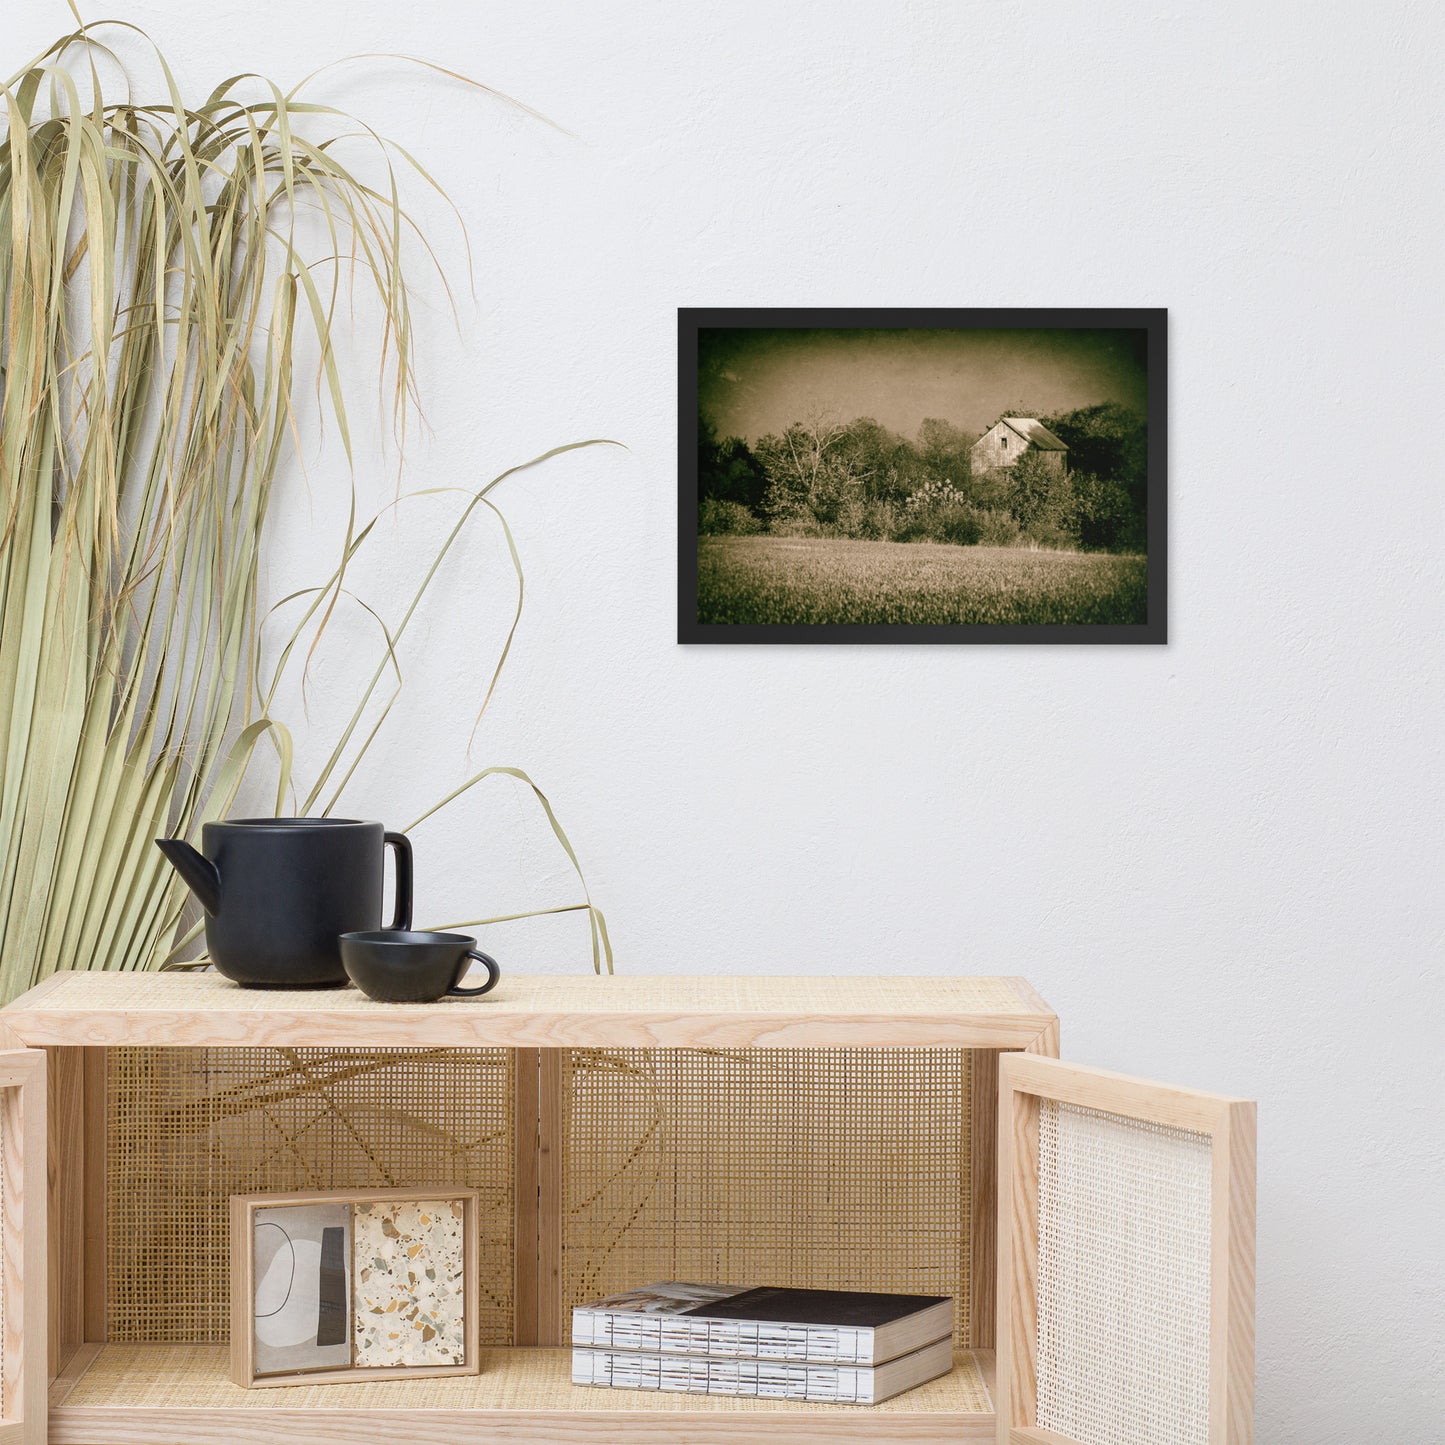 Modern Rustic Wall Art: Abandoned Barn In The Trees - Rural / Rustic / Farmhouse Style / Landscape / Nature Vintage Framed Photo Paper Prints - Artwork - Wall Decor